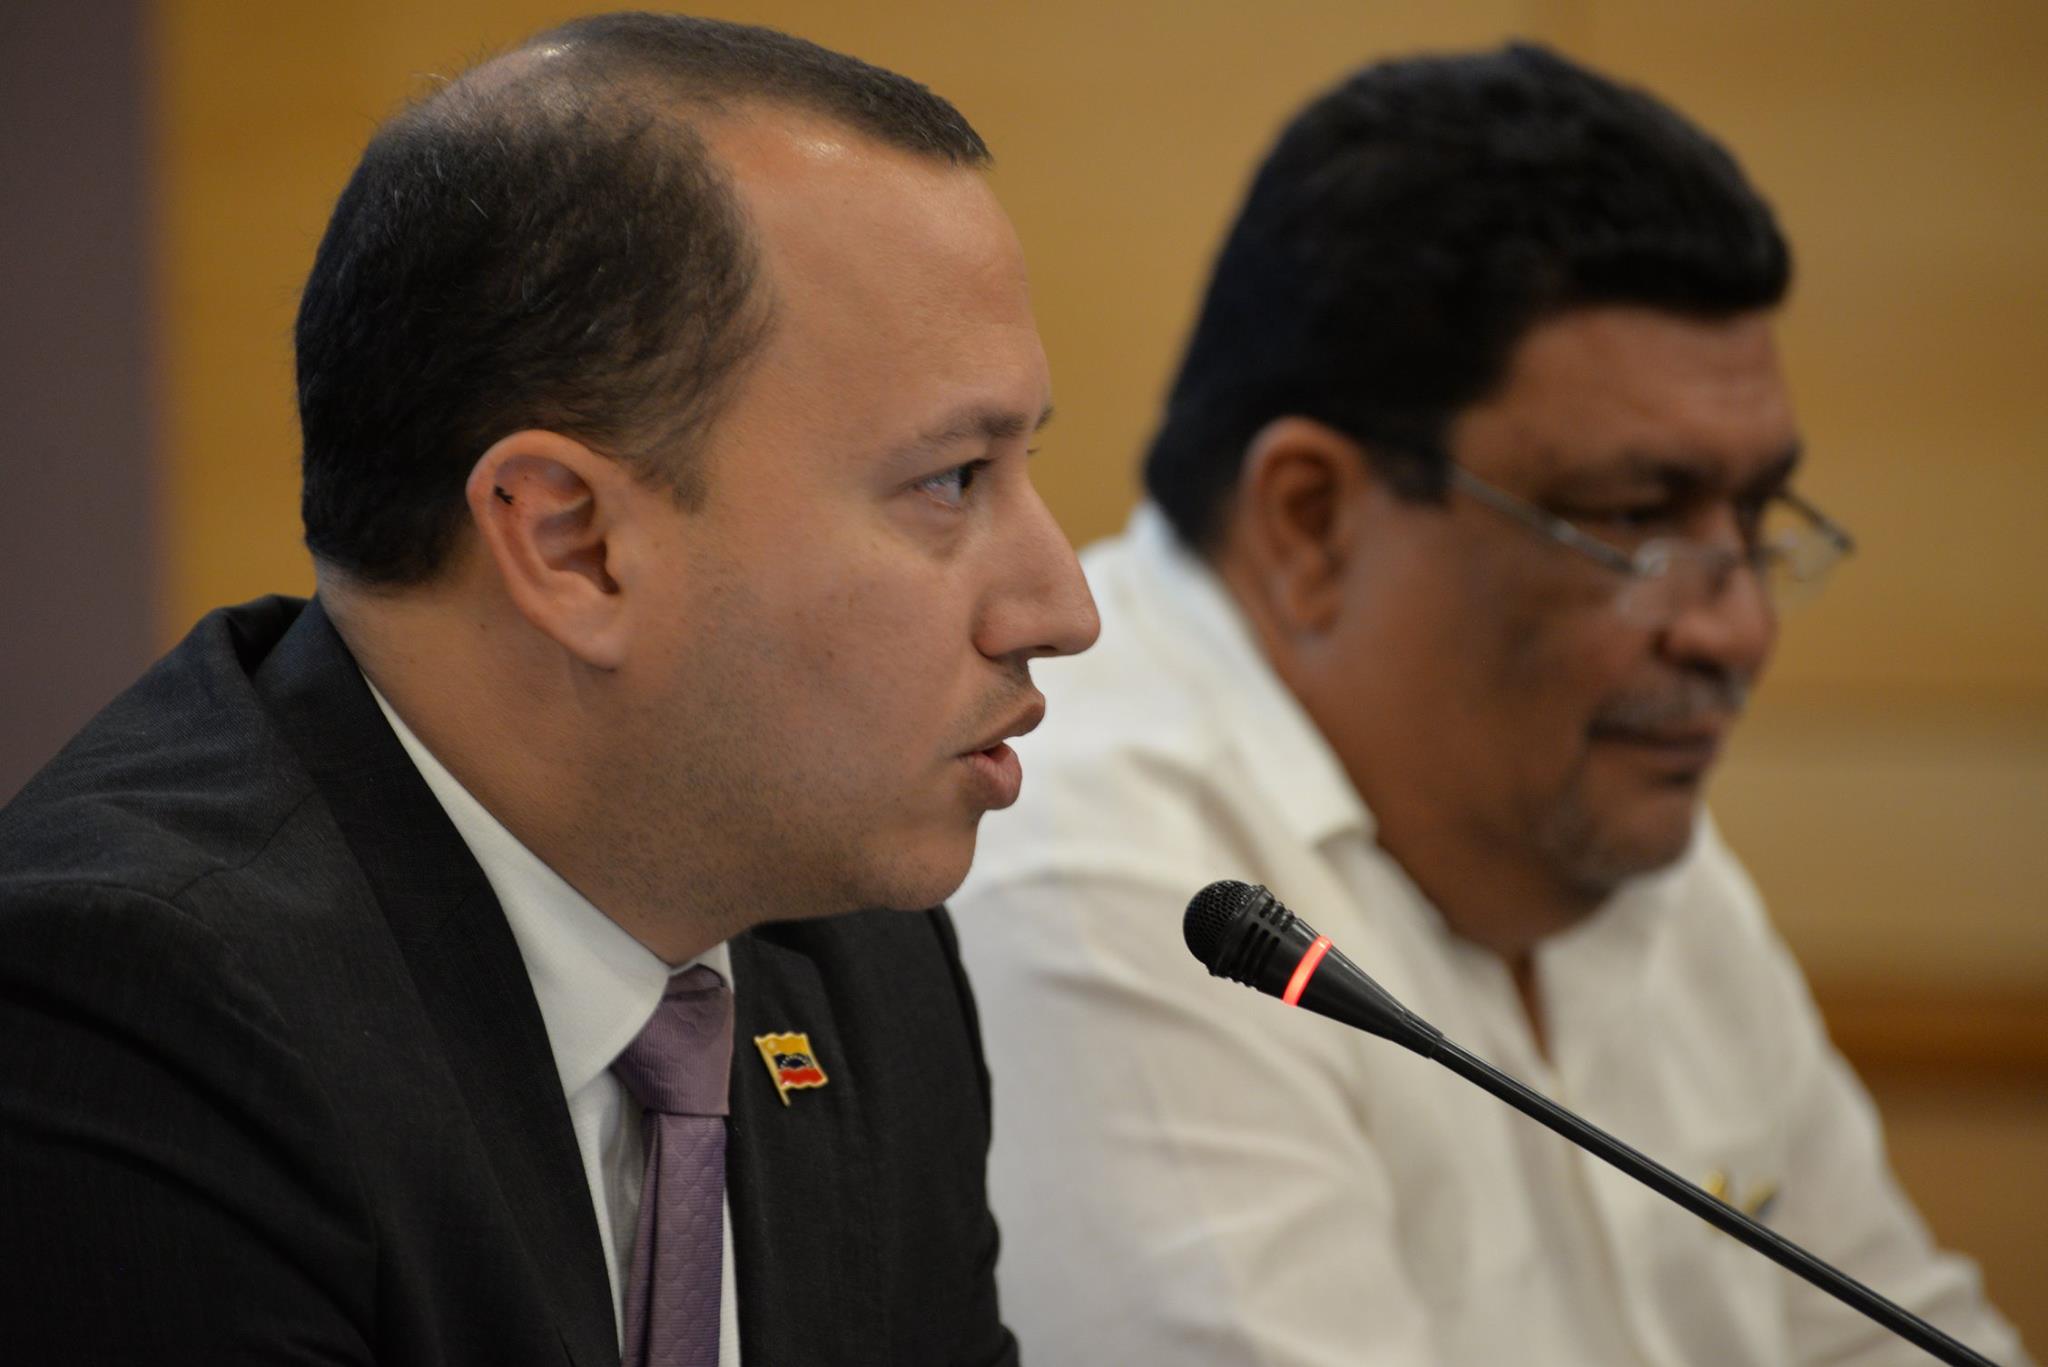 Raúl Licausi, Venezuela's Deputy Minister of Foreign Affairs for the Caribbean area, speaks at the opening of the II Conference of the Association of Caribbean States in Margarita, Venezuela on Wednesday.